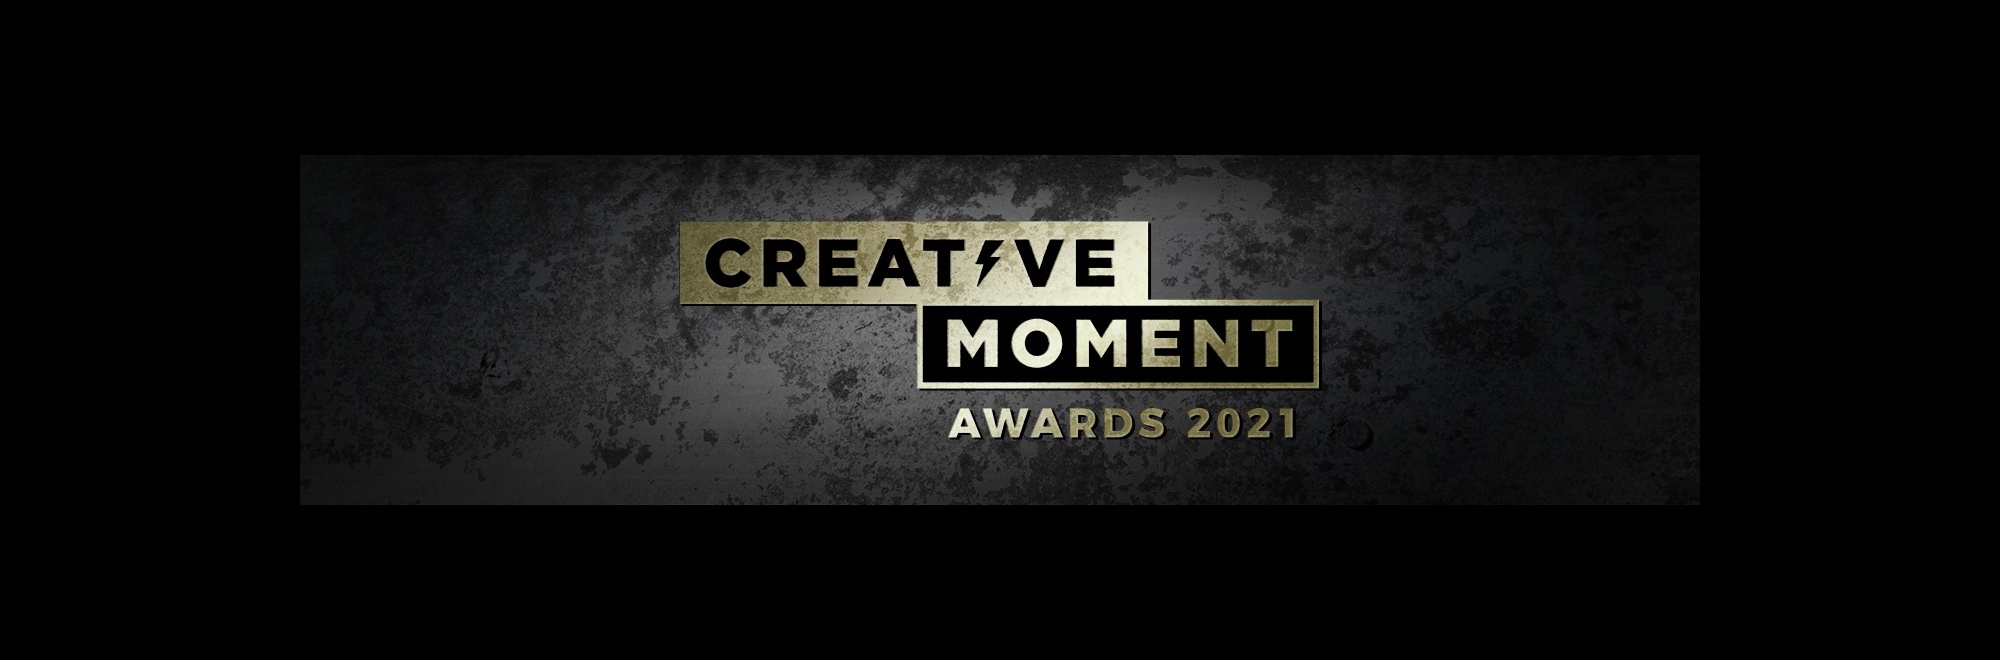 The Creative Moment Awards judges talk about what they are looking for in a winning entry